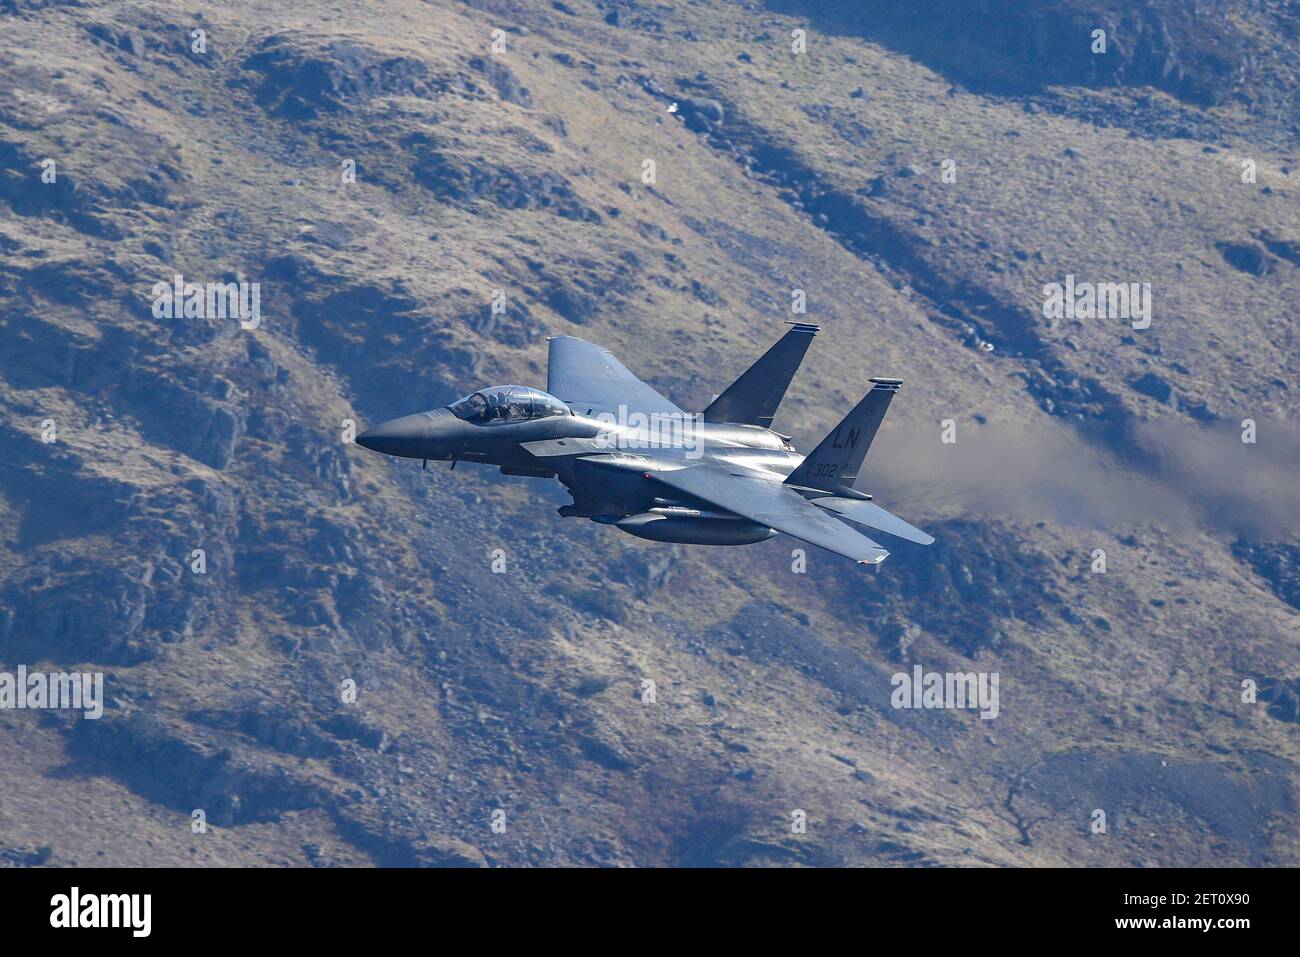 Thirlmere reservoir, near Keswick, The Lake District, Cumbria, UK. 1st March, 2021. A USAF McDonnell Douglas F-15 Eagle during low level training sorties over Thirlmere reservoir, near Keswick, The Lake District, Cumbria in Keswick, UK on 3/1/2021. (Photo by Mark Cosgrove/News Images/Sipa USA) Credit: Sipa USA/Alamy Live News Credit: Sipa USA/Alamy Live News Stock Photo